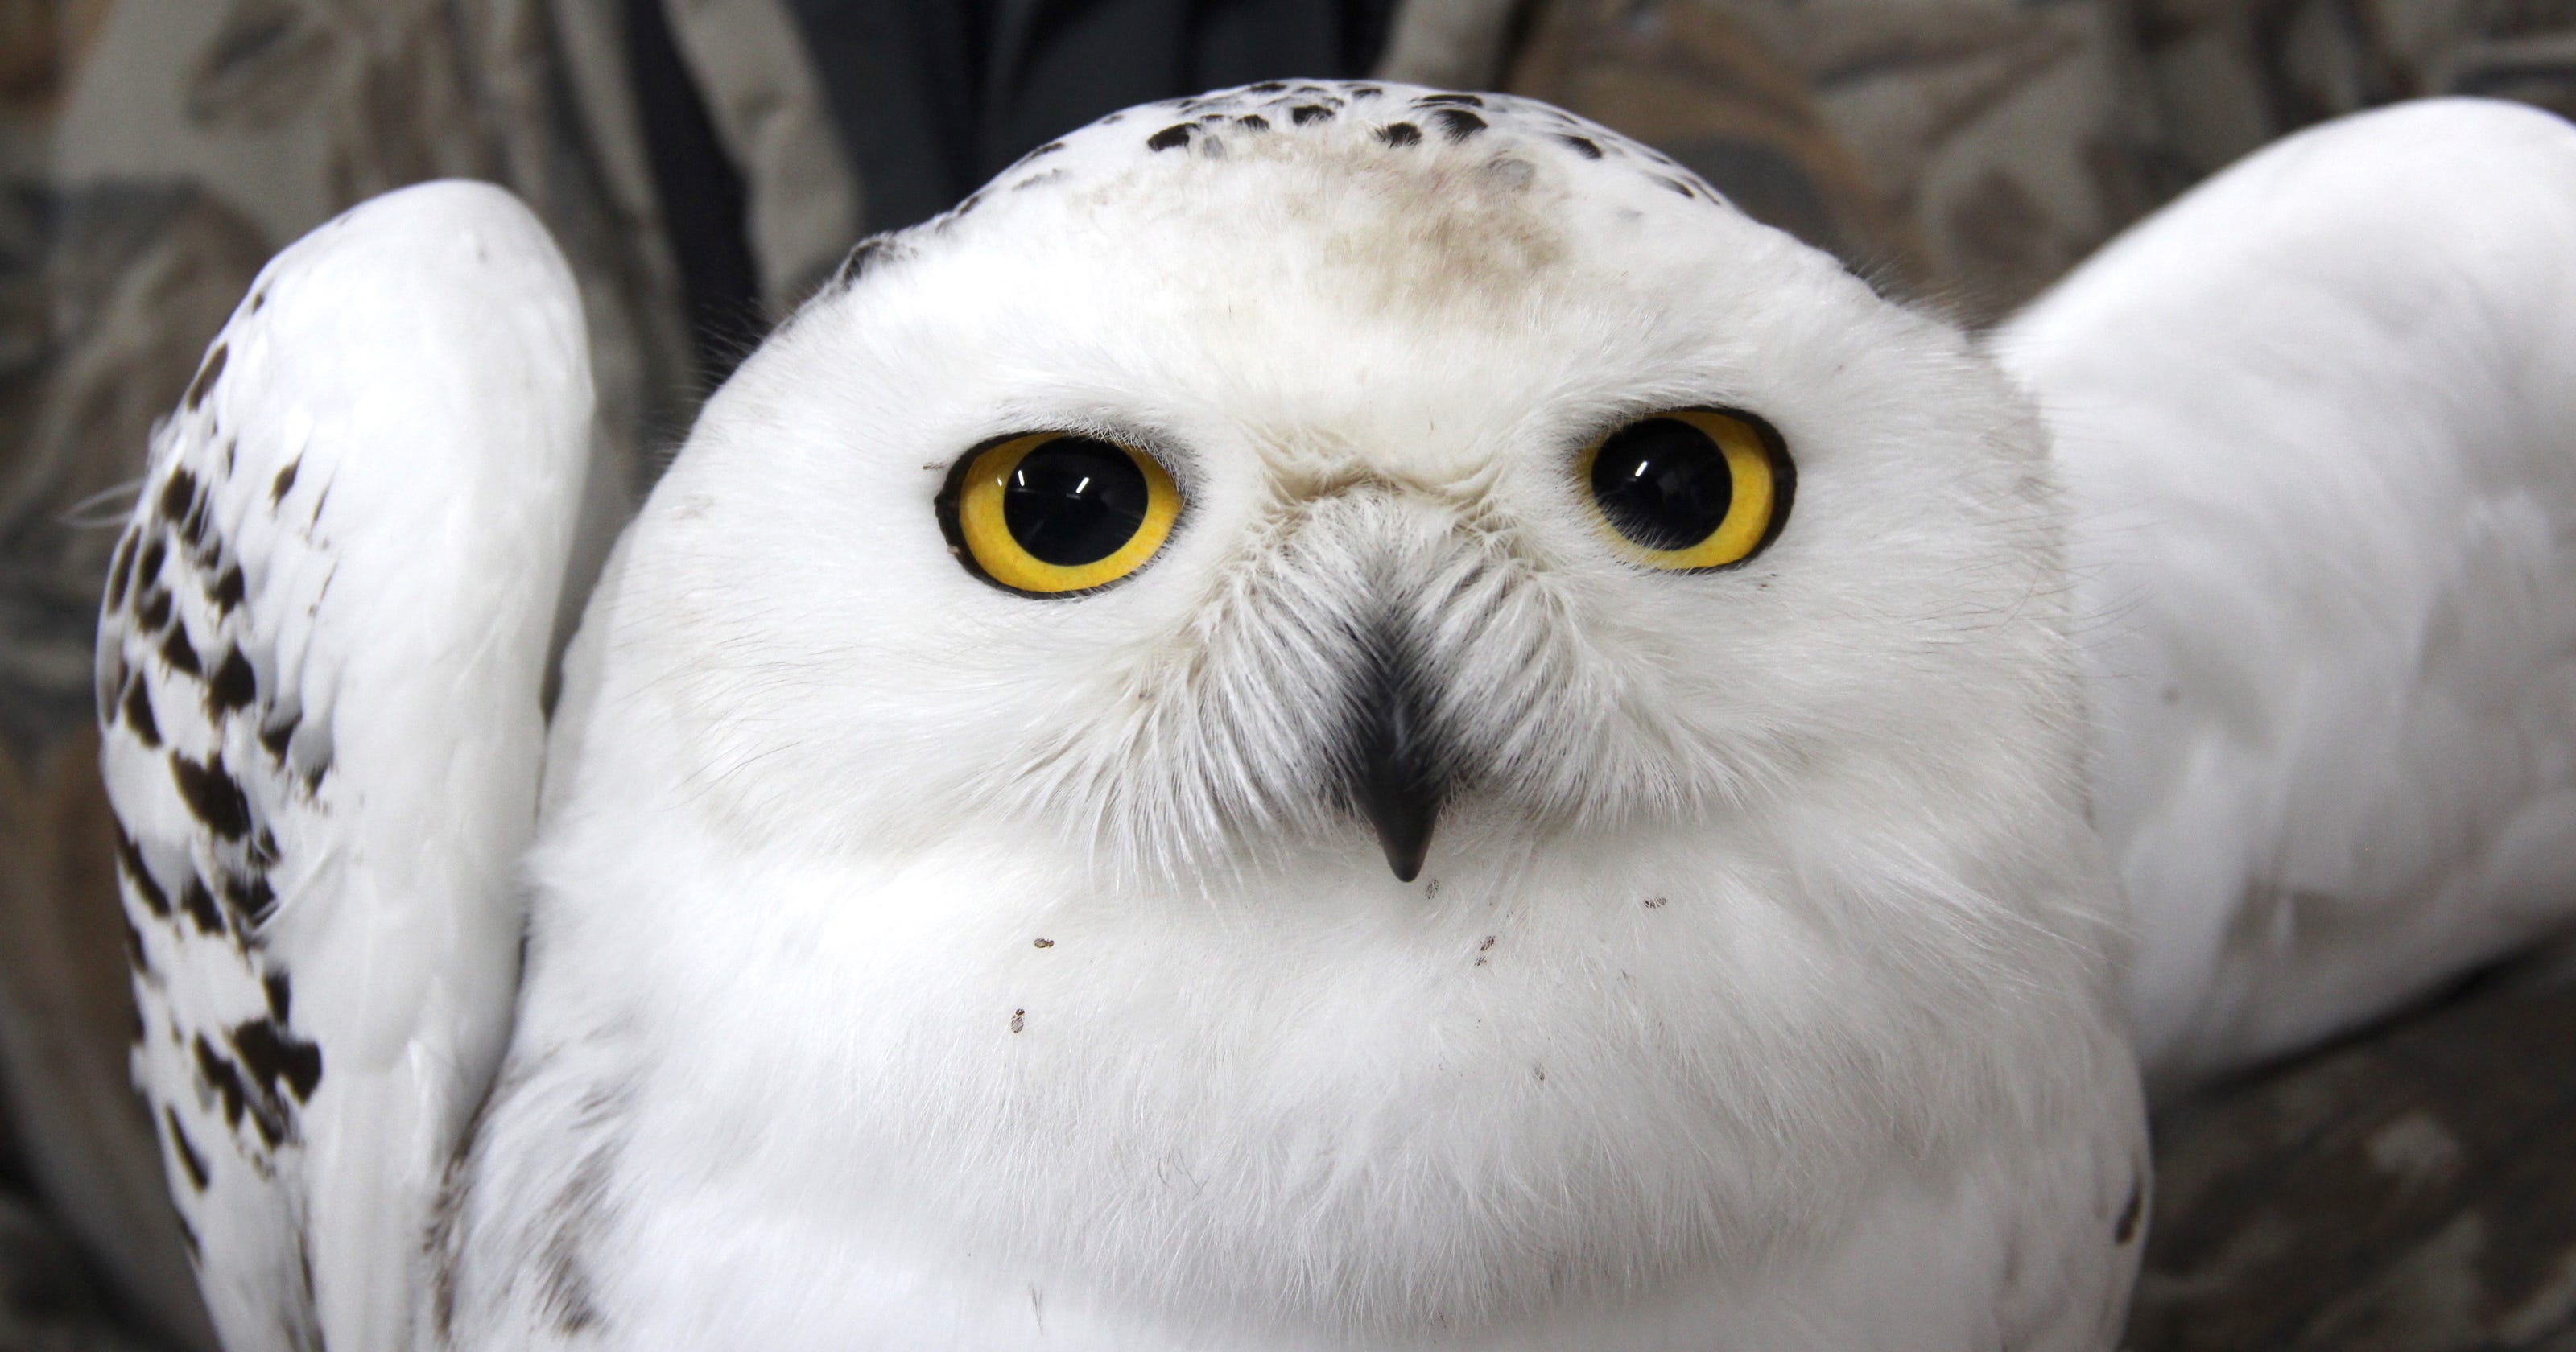 Record number of snowy owls sighted in Wisconsin this winter